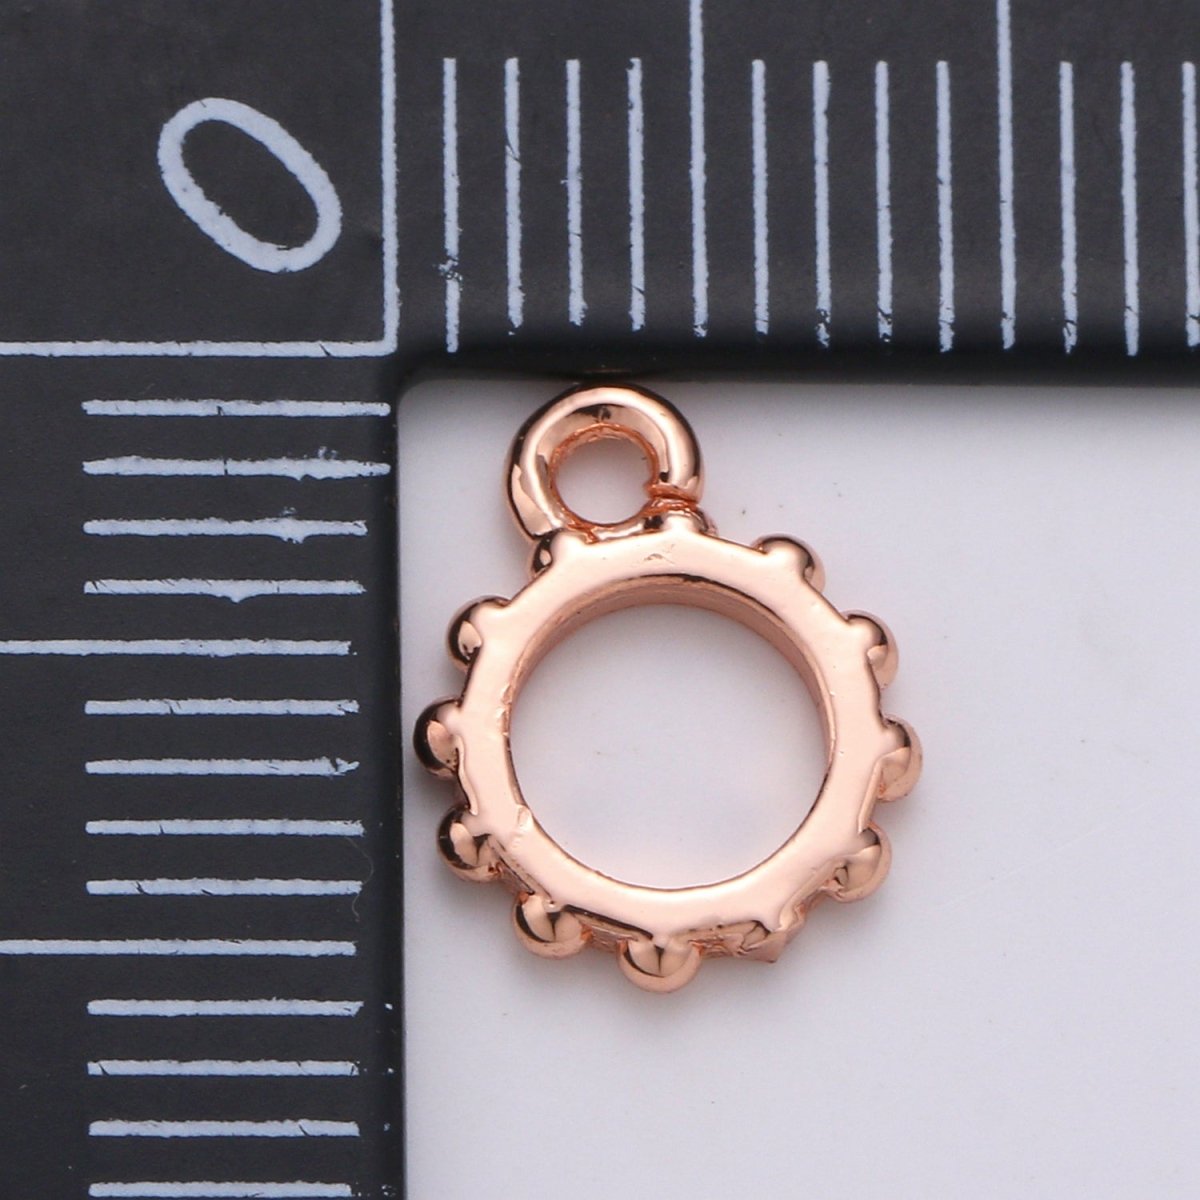 Round Gold Bail, Silver bail, Lead Nickel free, Pendant bail Rose Gold bail for charm Necklace making supplies, Jewelry supplies K-192 - K-195 - DLUXCA